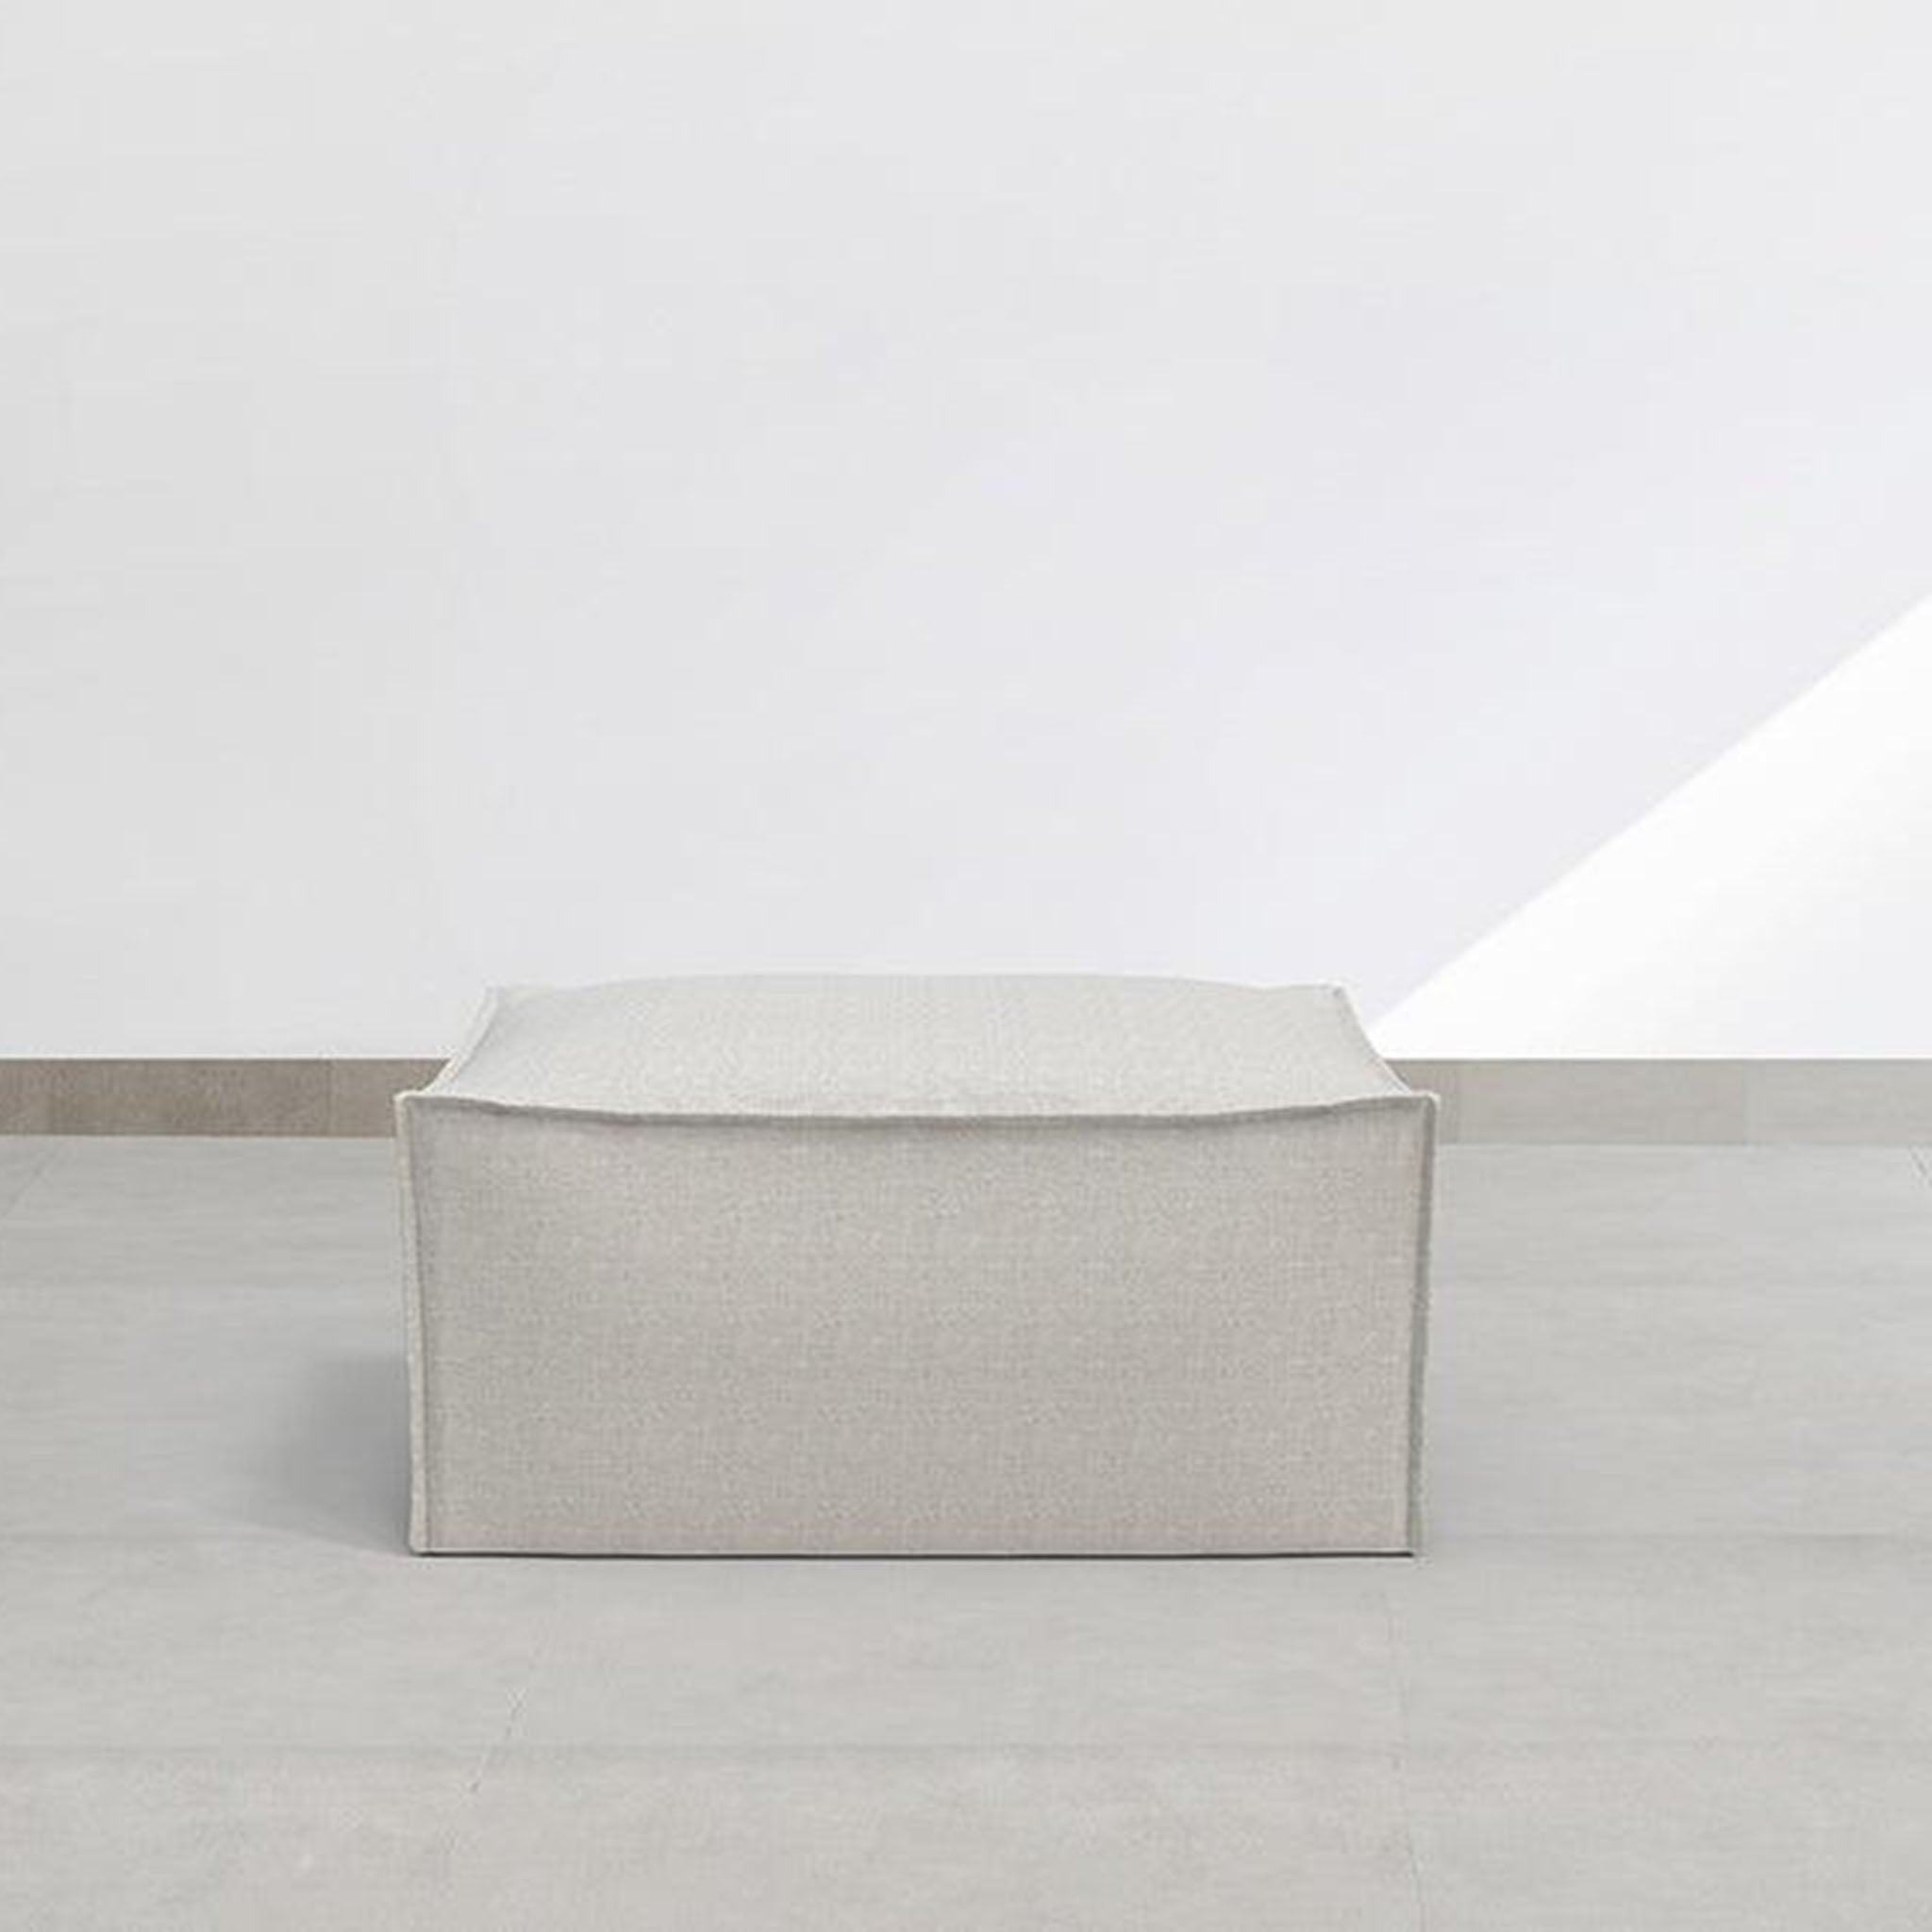 Light gray fabric ottoman in a minimalist design, ideal for contemporary living rooms and providing versatile seating or a stylish footrest.